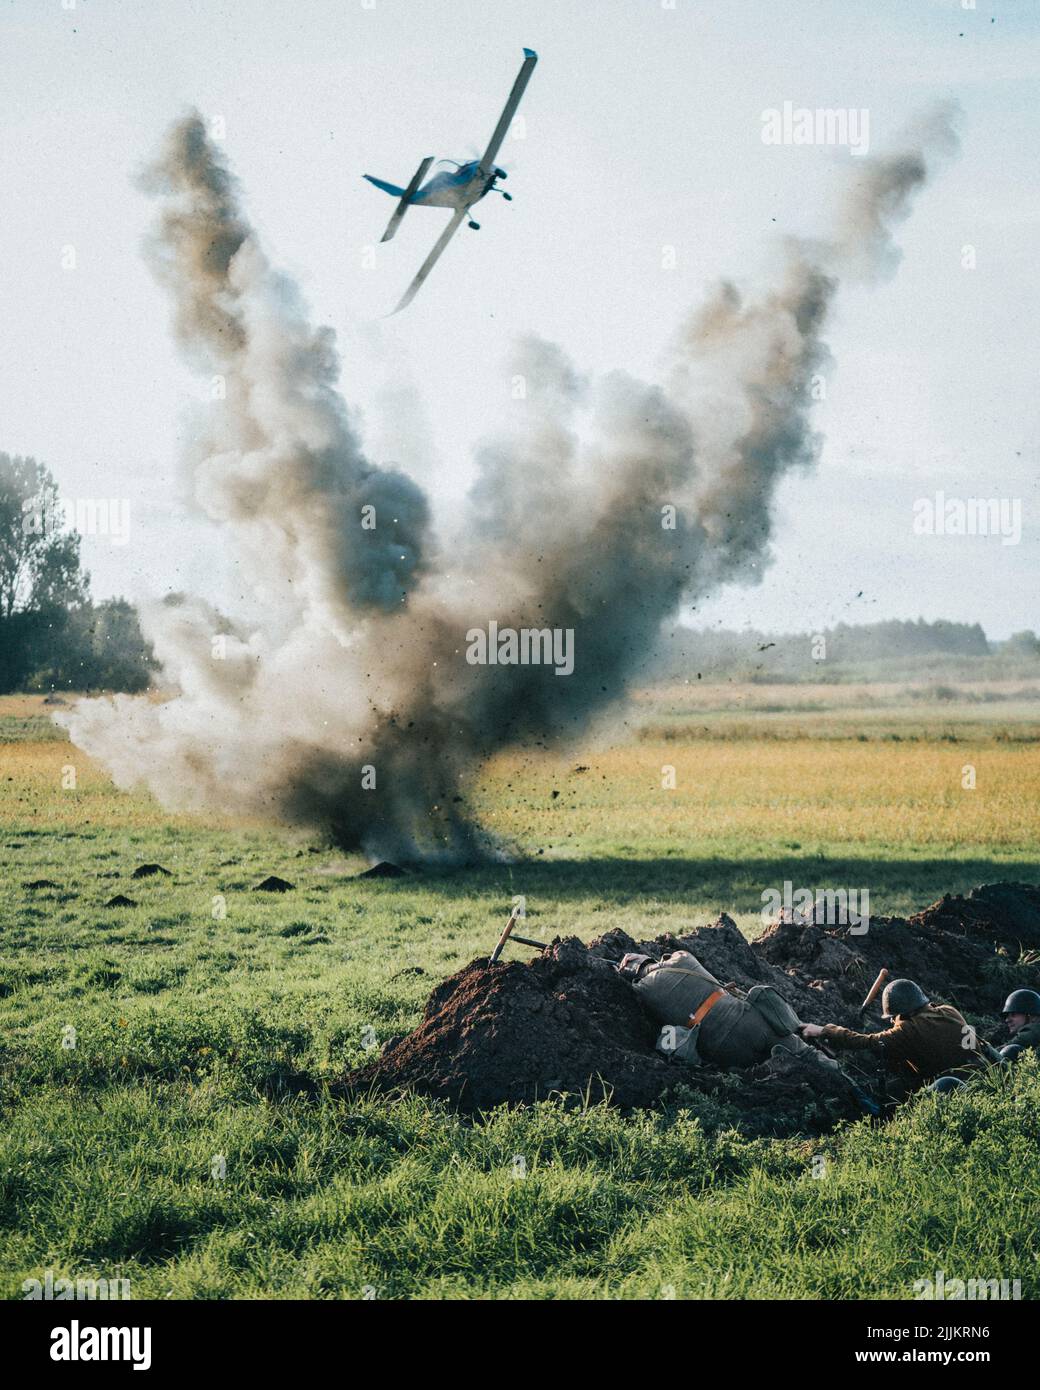 A World War 2 plane bombarding a green field with soldiers cowering in the trenches Stock Photo